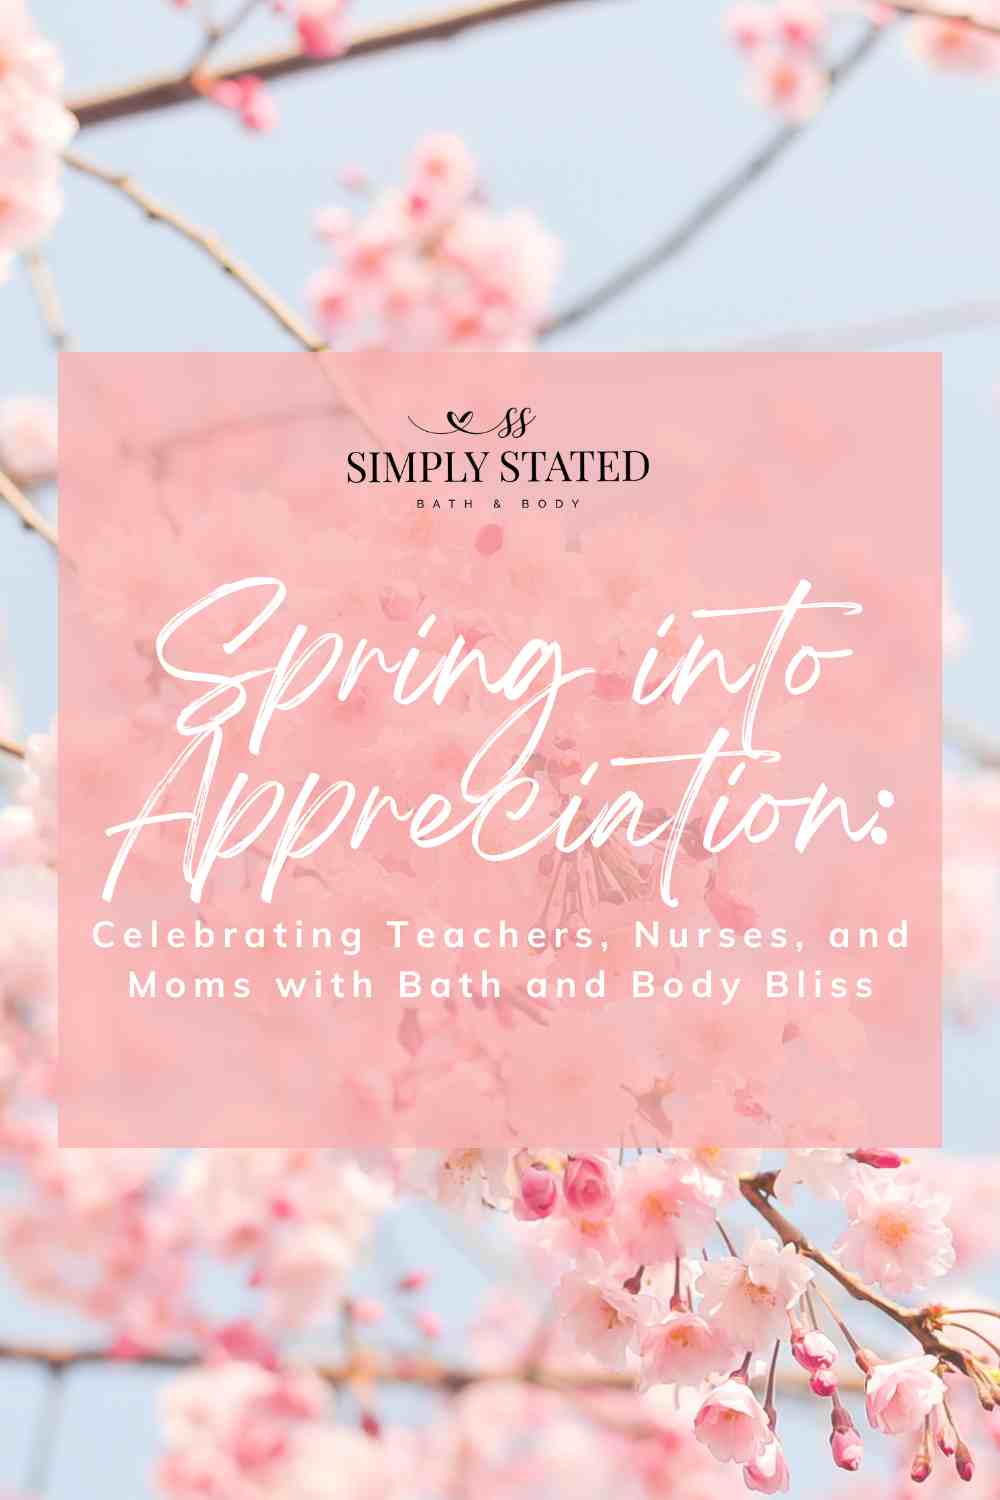 Spring into Appreciation: Celebrating Teachers, Nurses, and Moms with Bath and Body Bliss